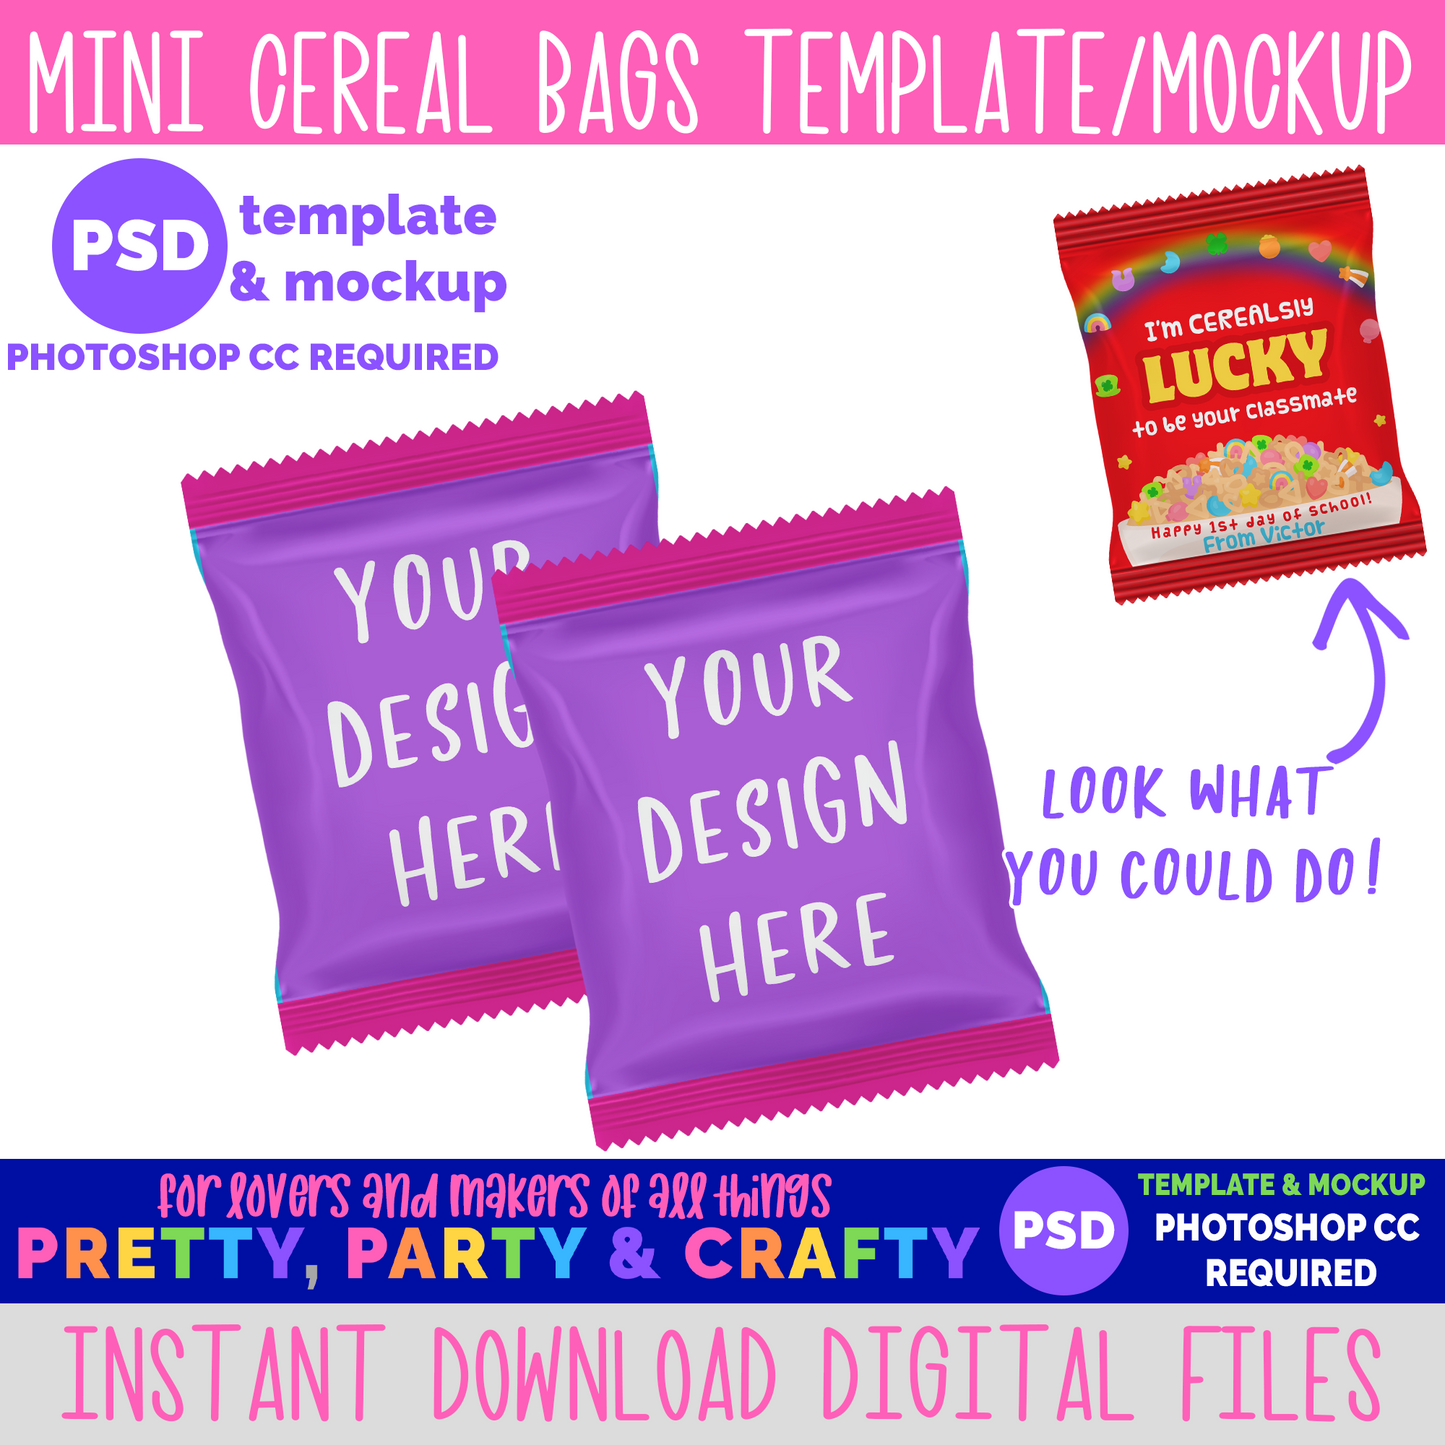 Cereal Bag Template and Mockup -PHOTOSHOP